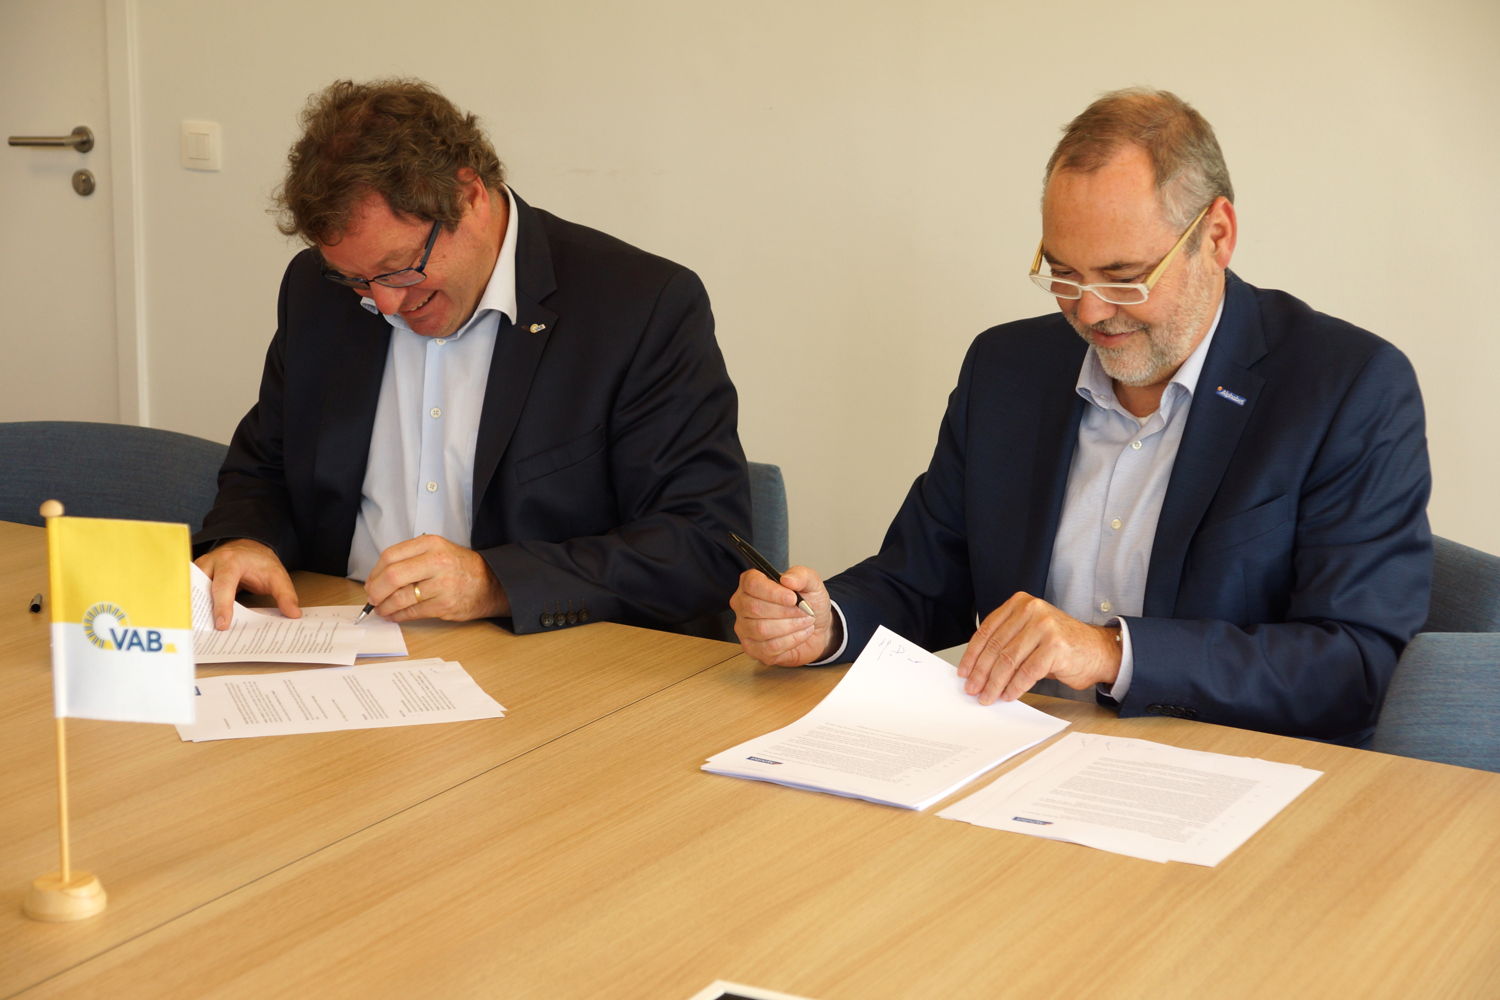 Erik Swerts, CEO of Alphabet Belgium, and Geert Markey, CEO of VAB, signing the new contract.